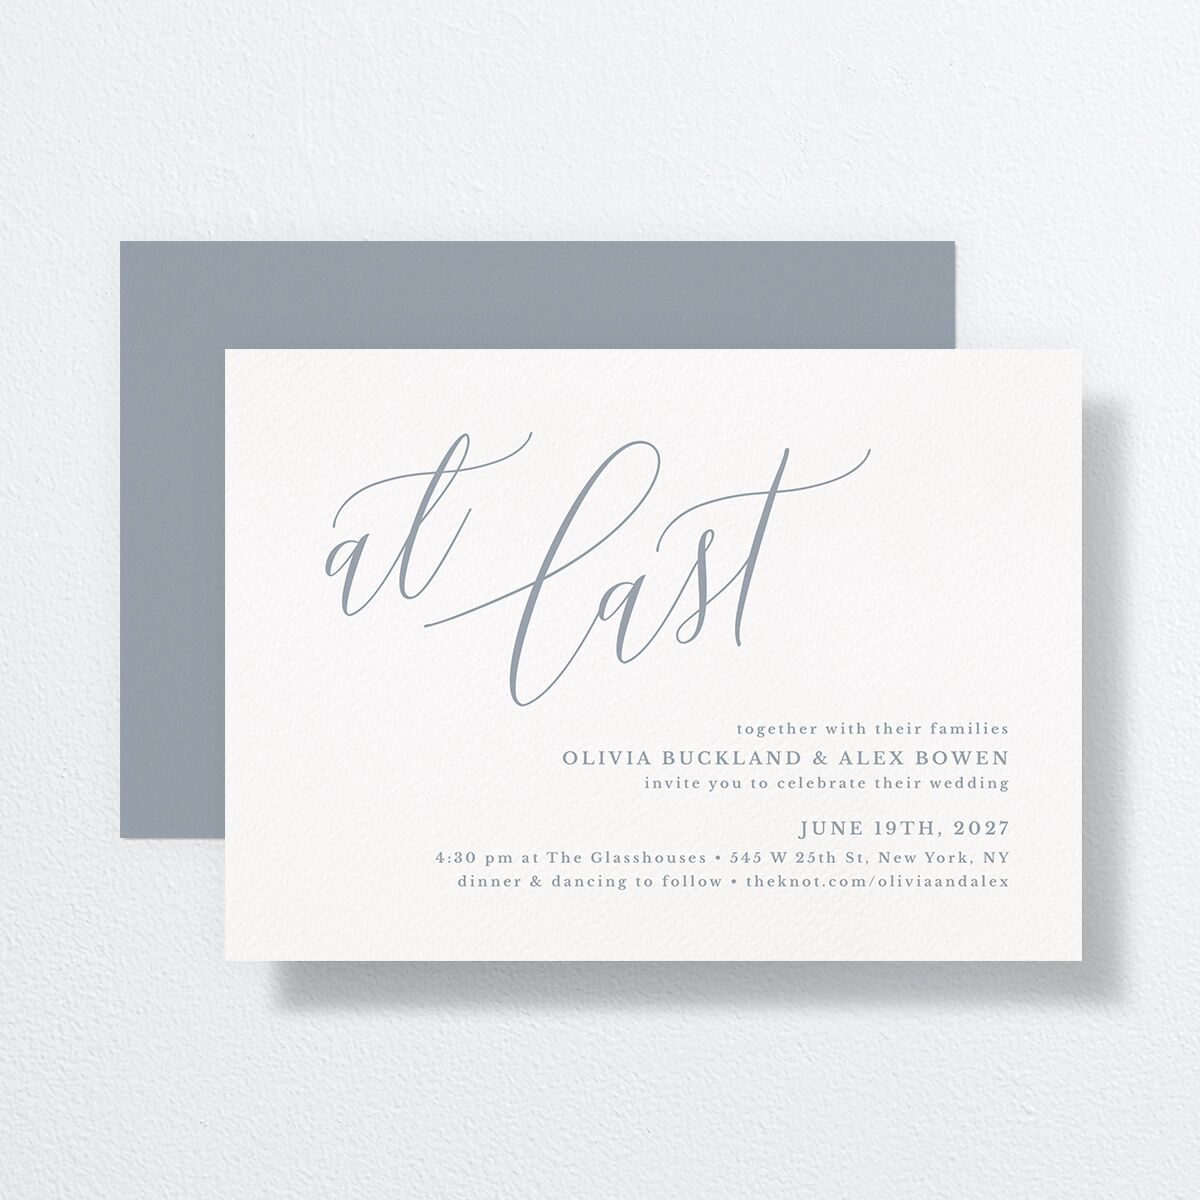 At Last Wedding Invitations front-and-back